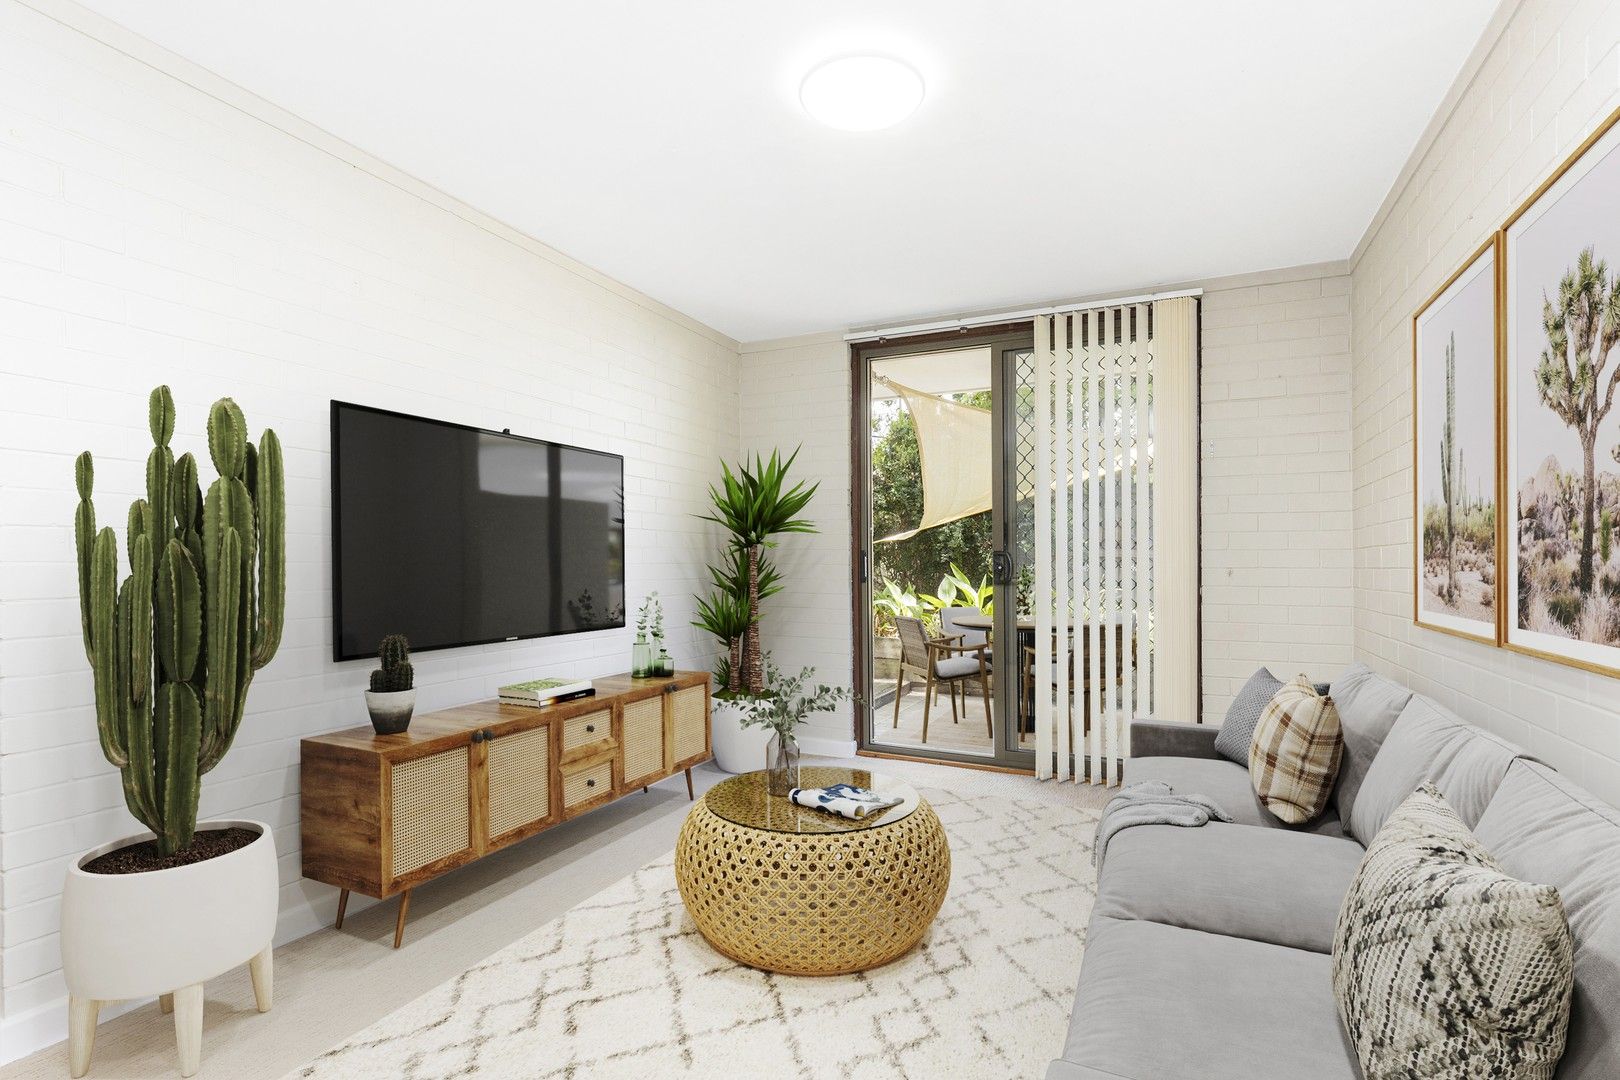 2 bedrooms Apartment / Unit / Flat in 13/126-128 Carr Street WEST PERTH WA, 6005